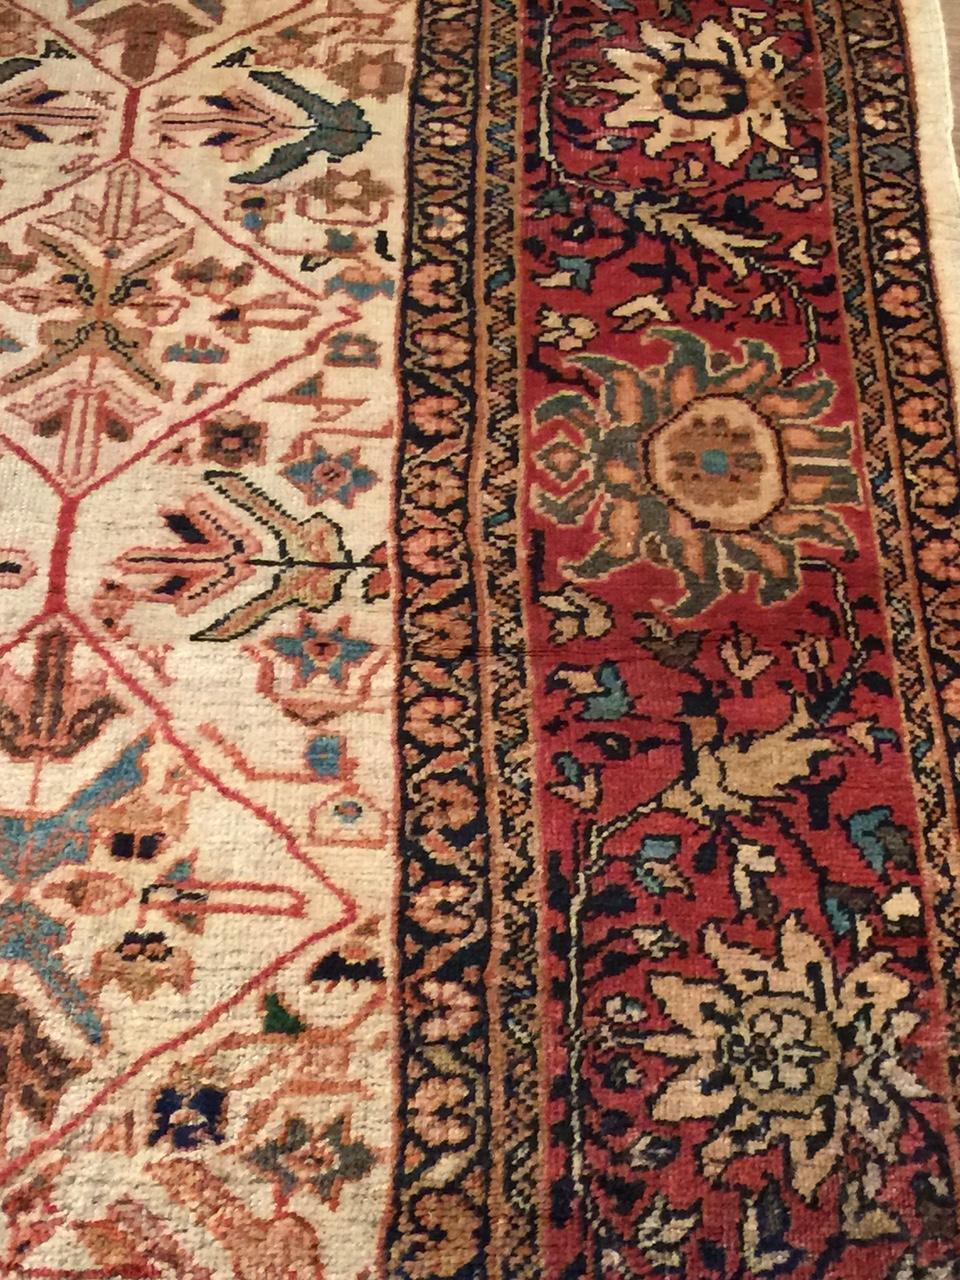 Antique Persian Ivory Mahal Area Rug 8'10x12'2 In Good Condition For Sale In New York, NY